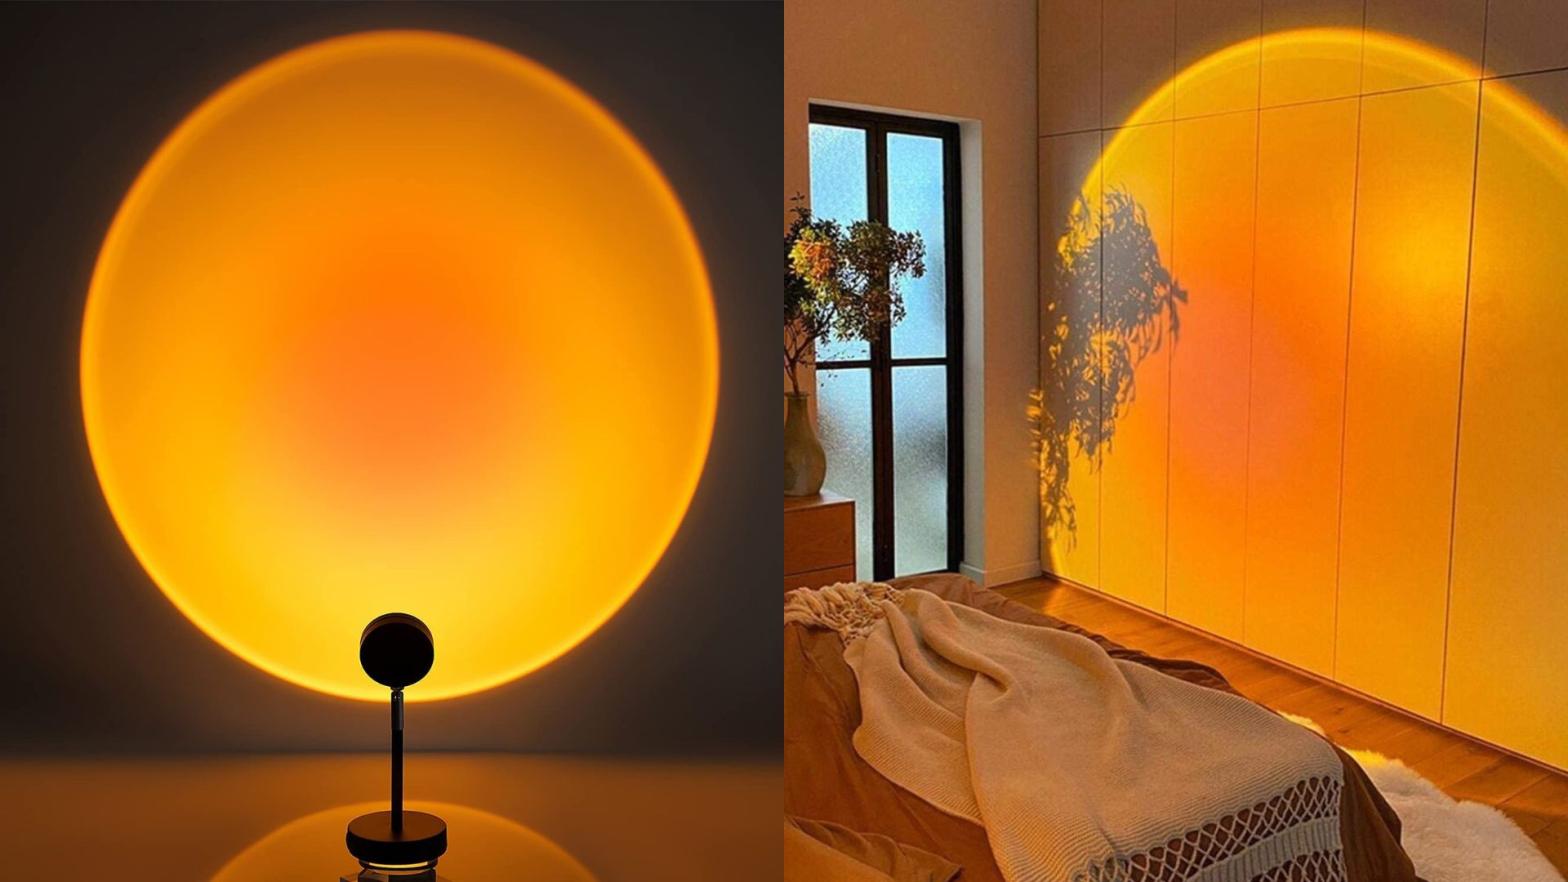 Sunset projection lamps